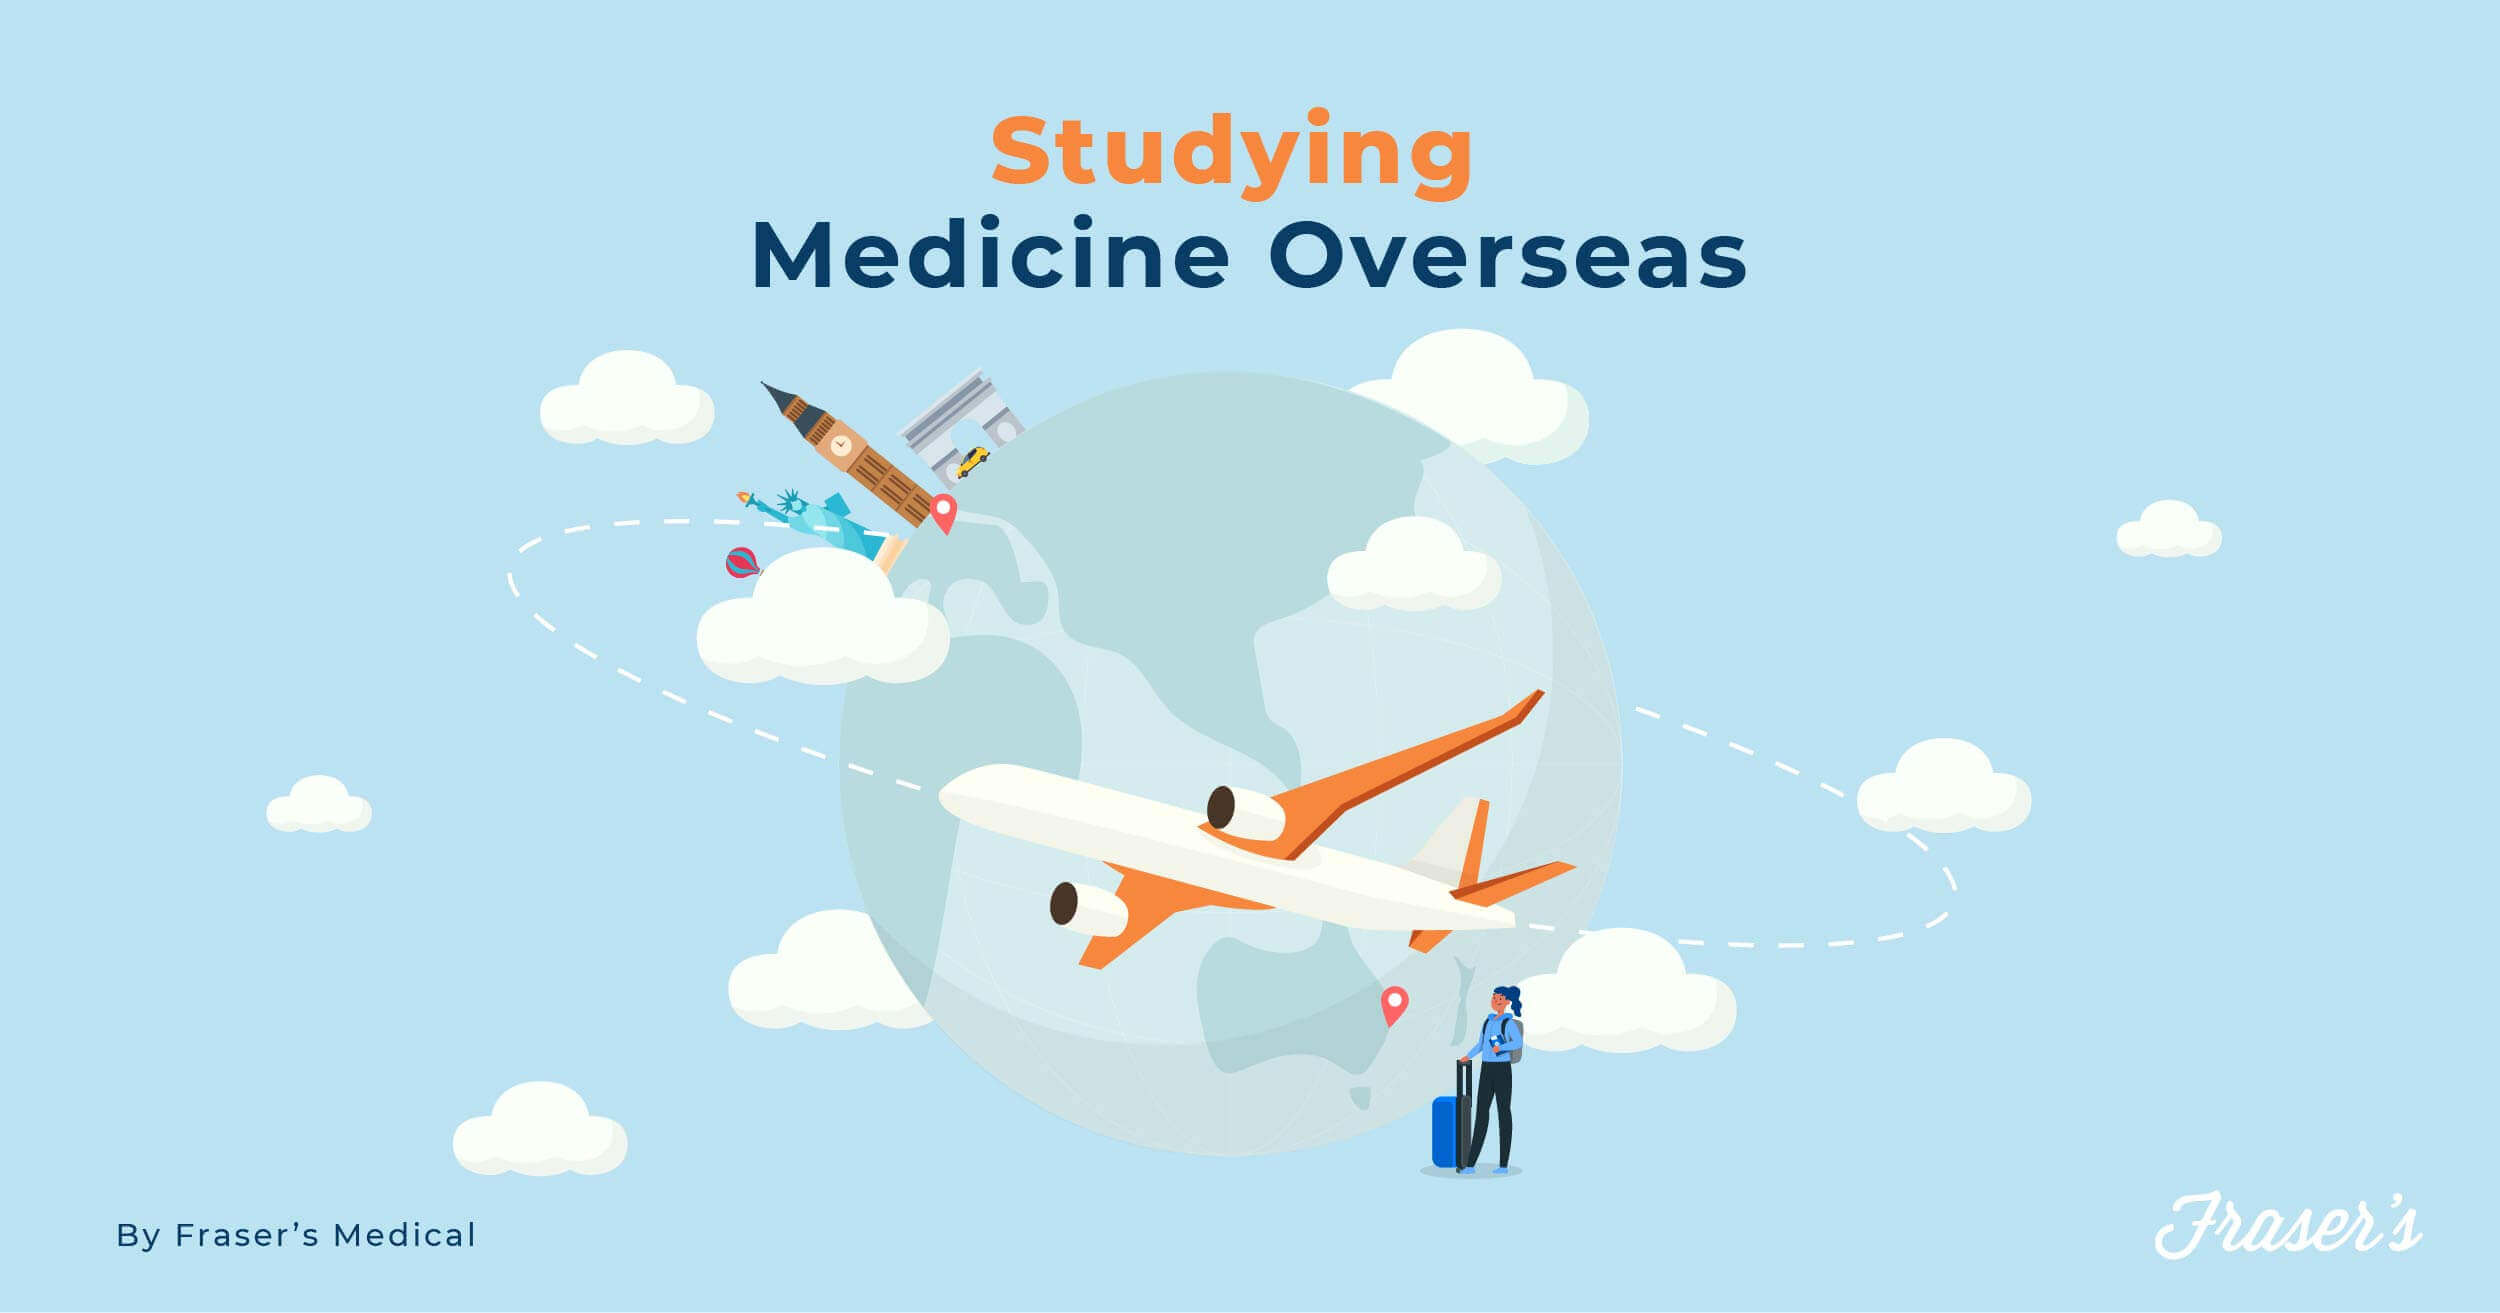 a detailed guide to studying medicine overseas